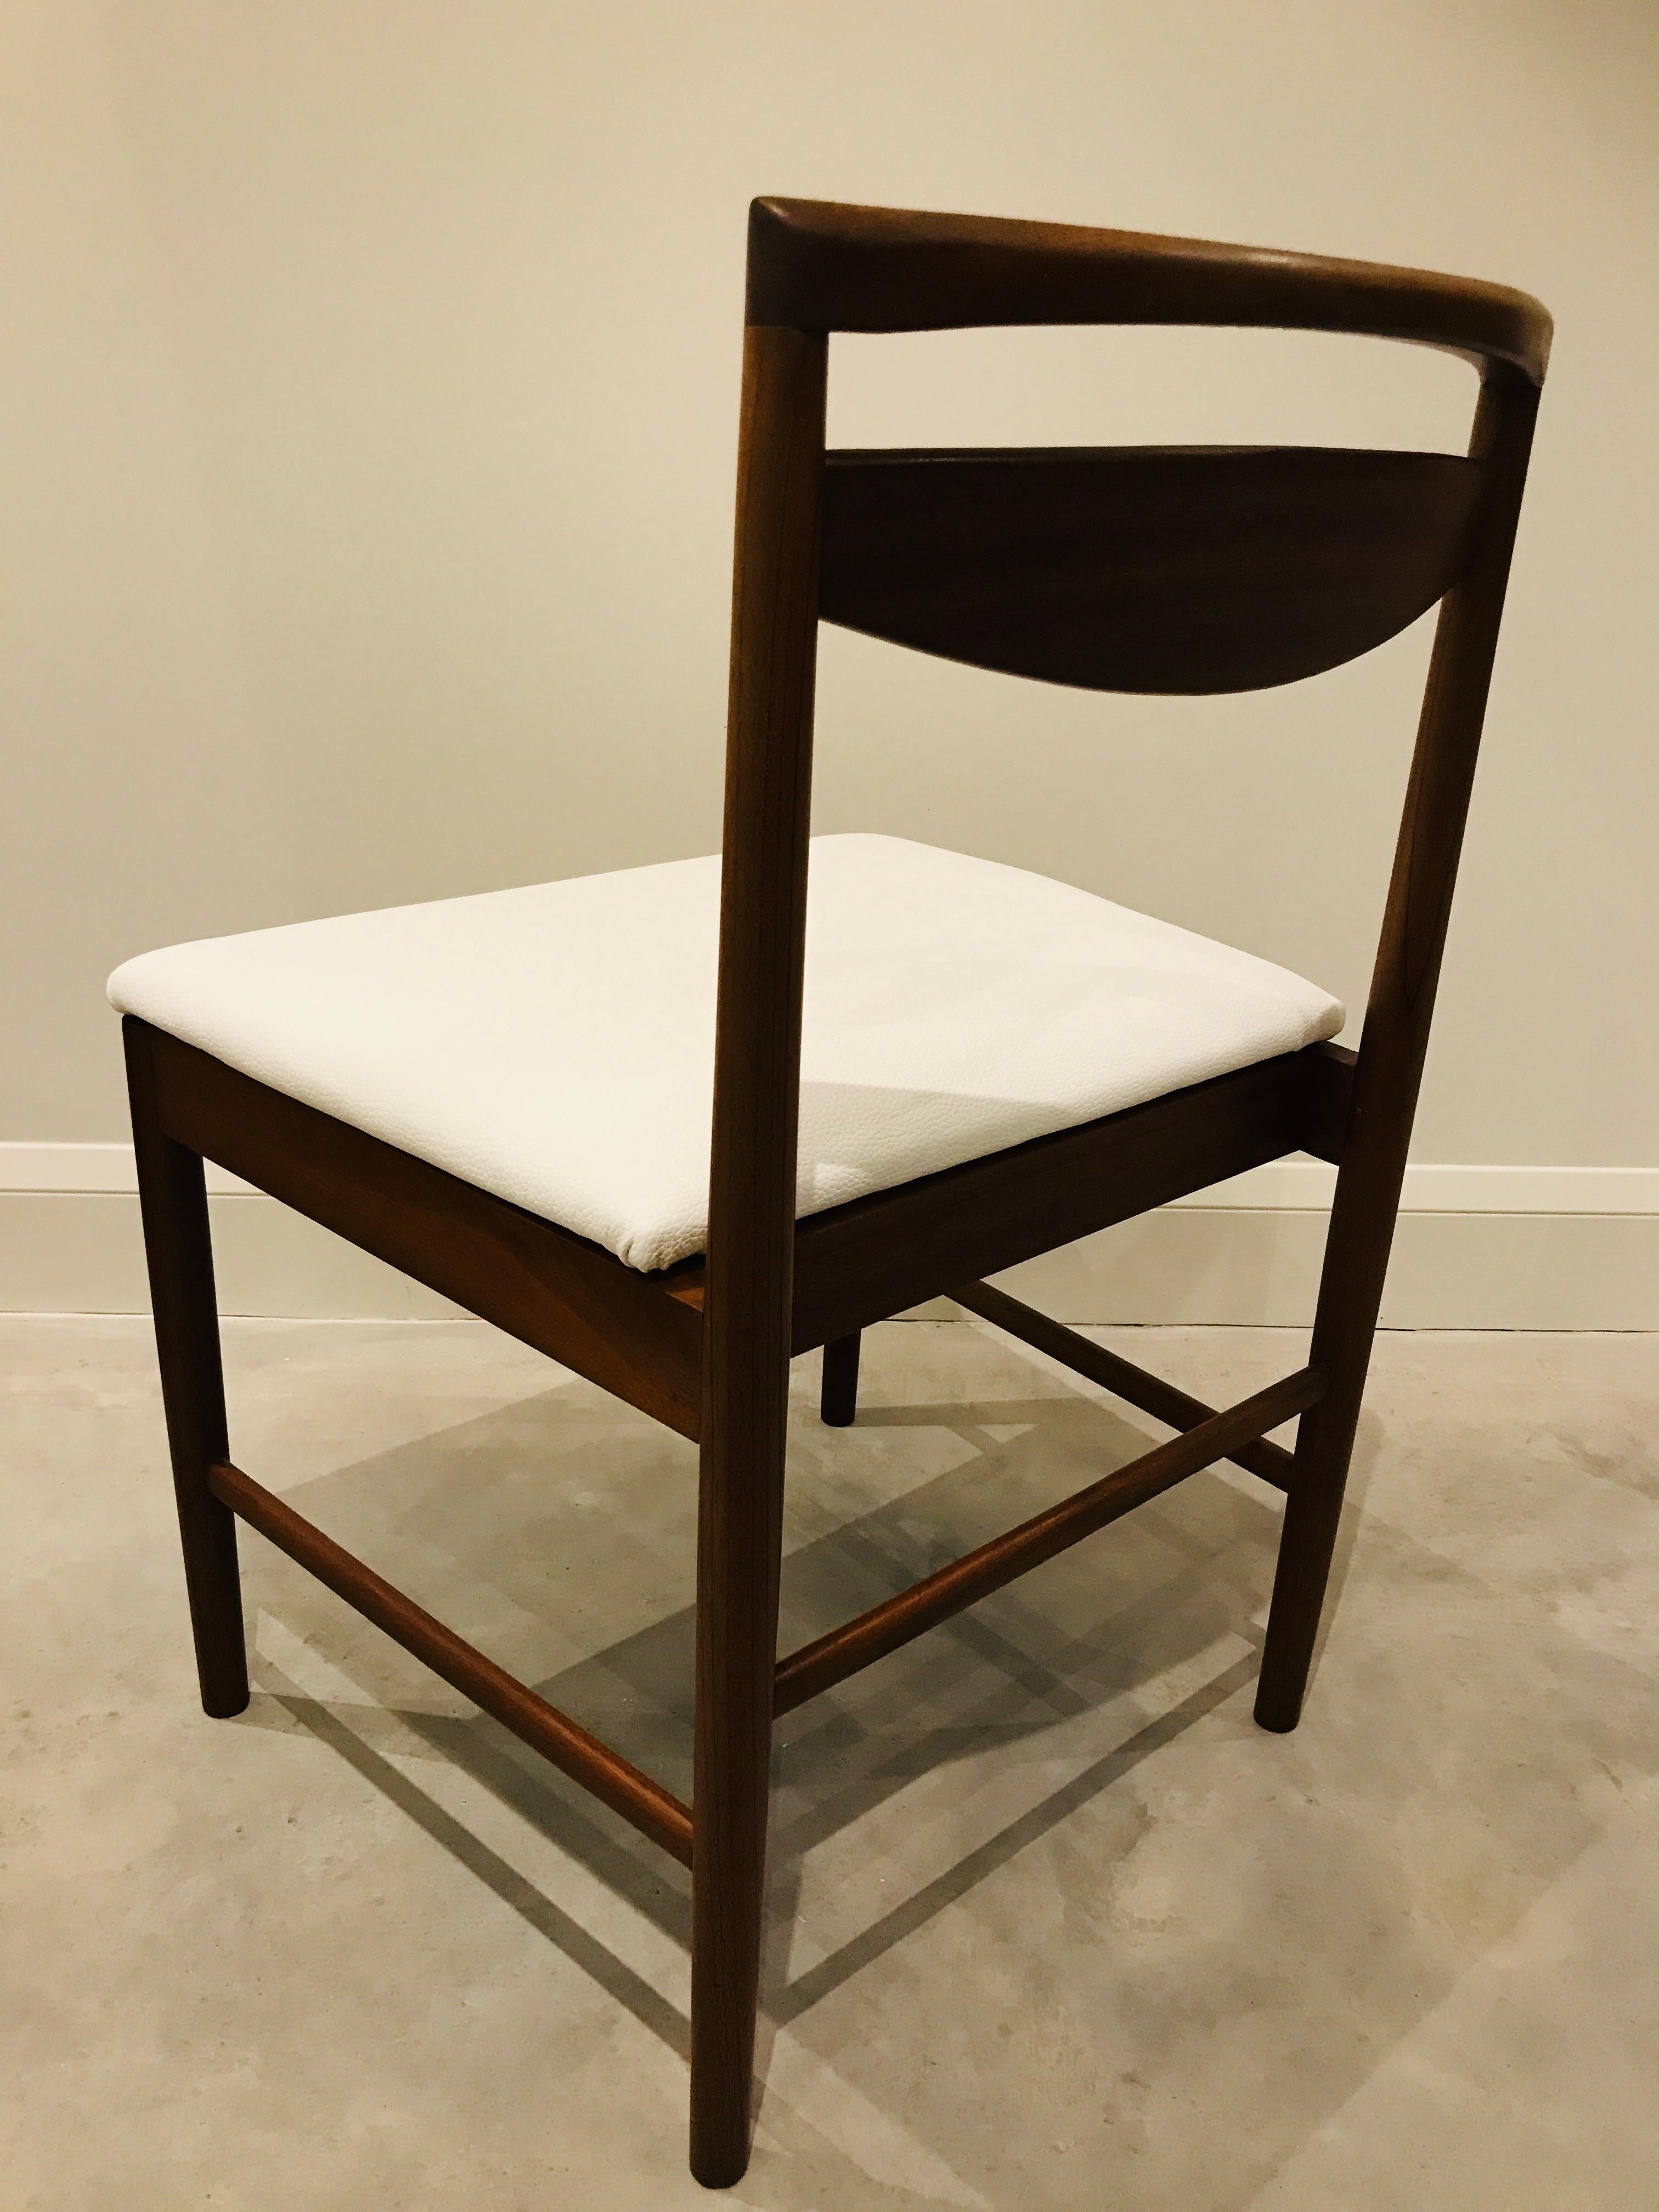 1970 Vintage Teak McIntosh Retro Dining Chairs Upholstered in White Leather For Sale 4